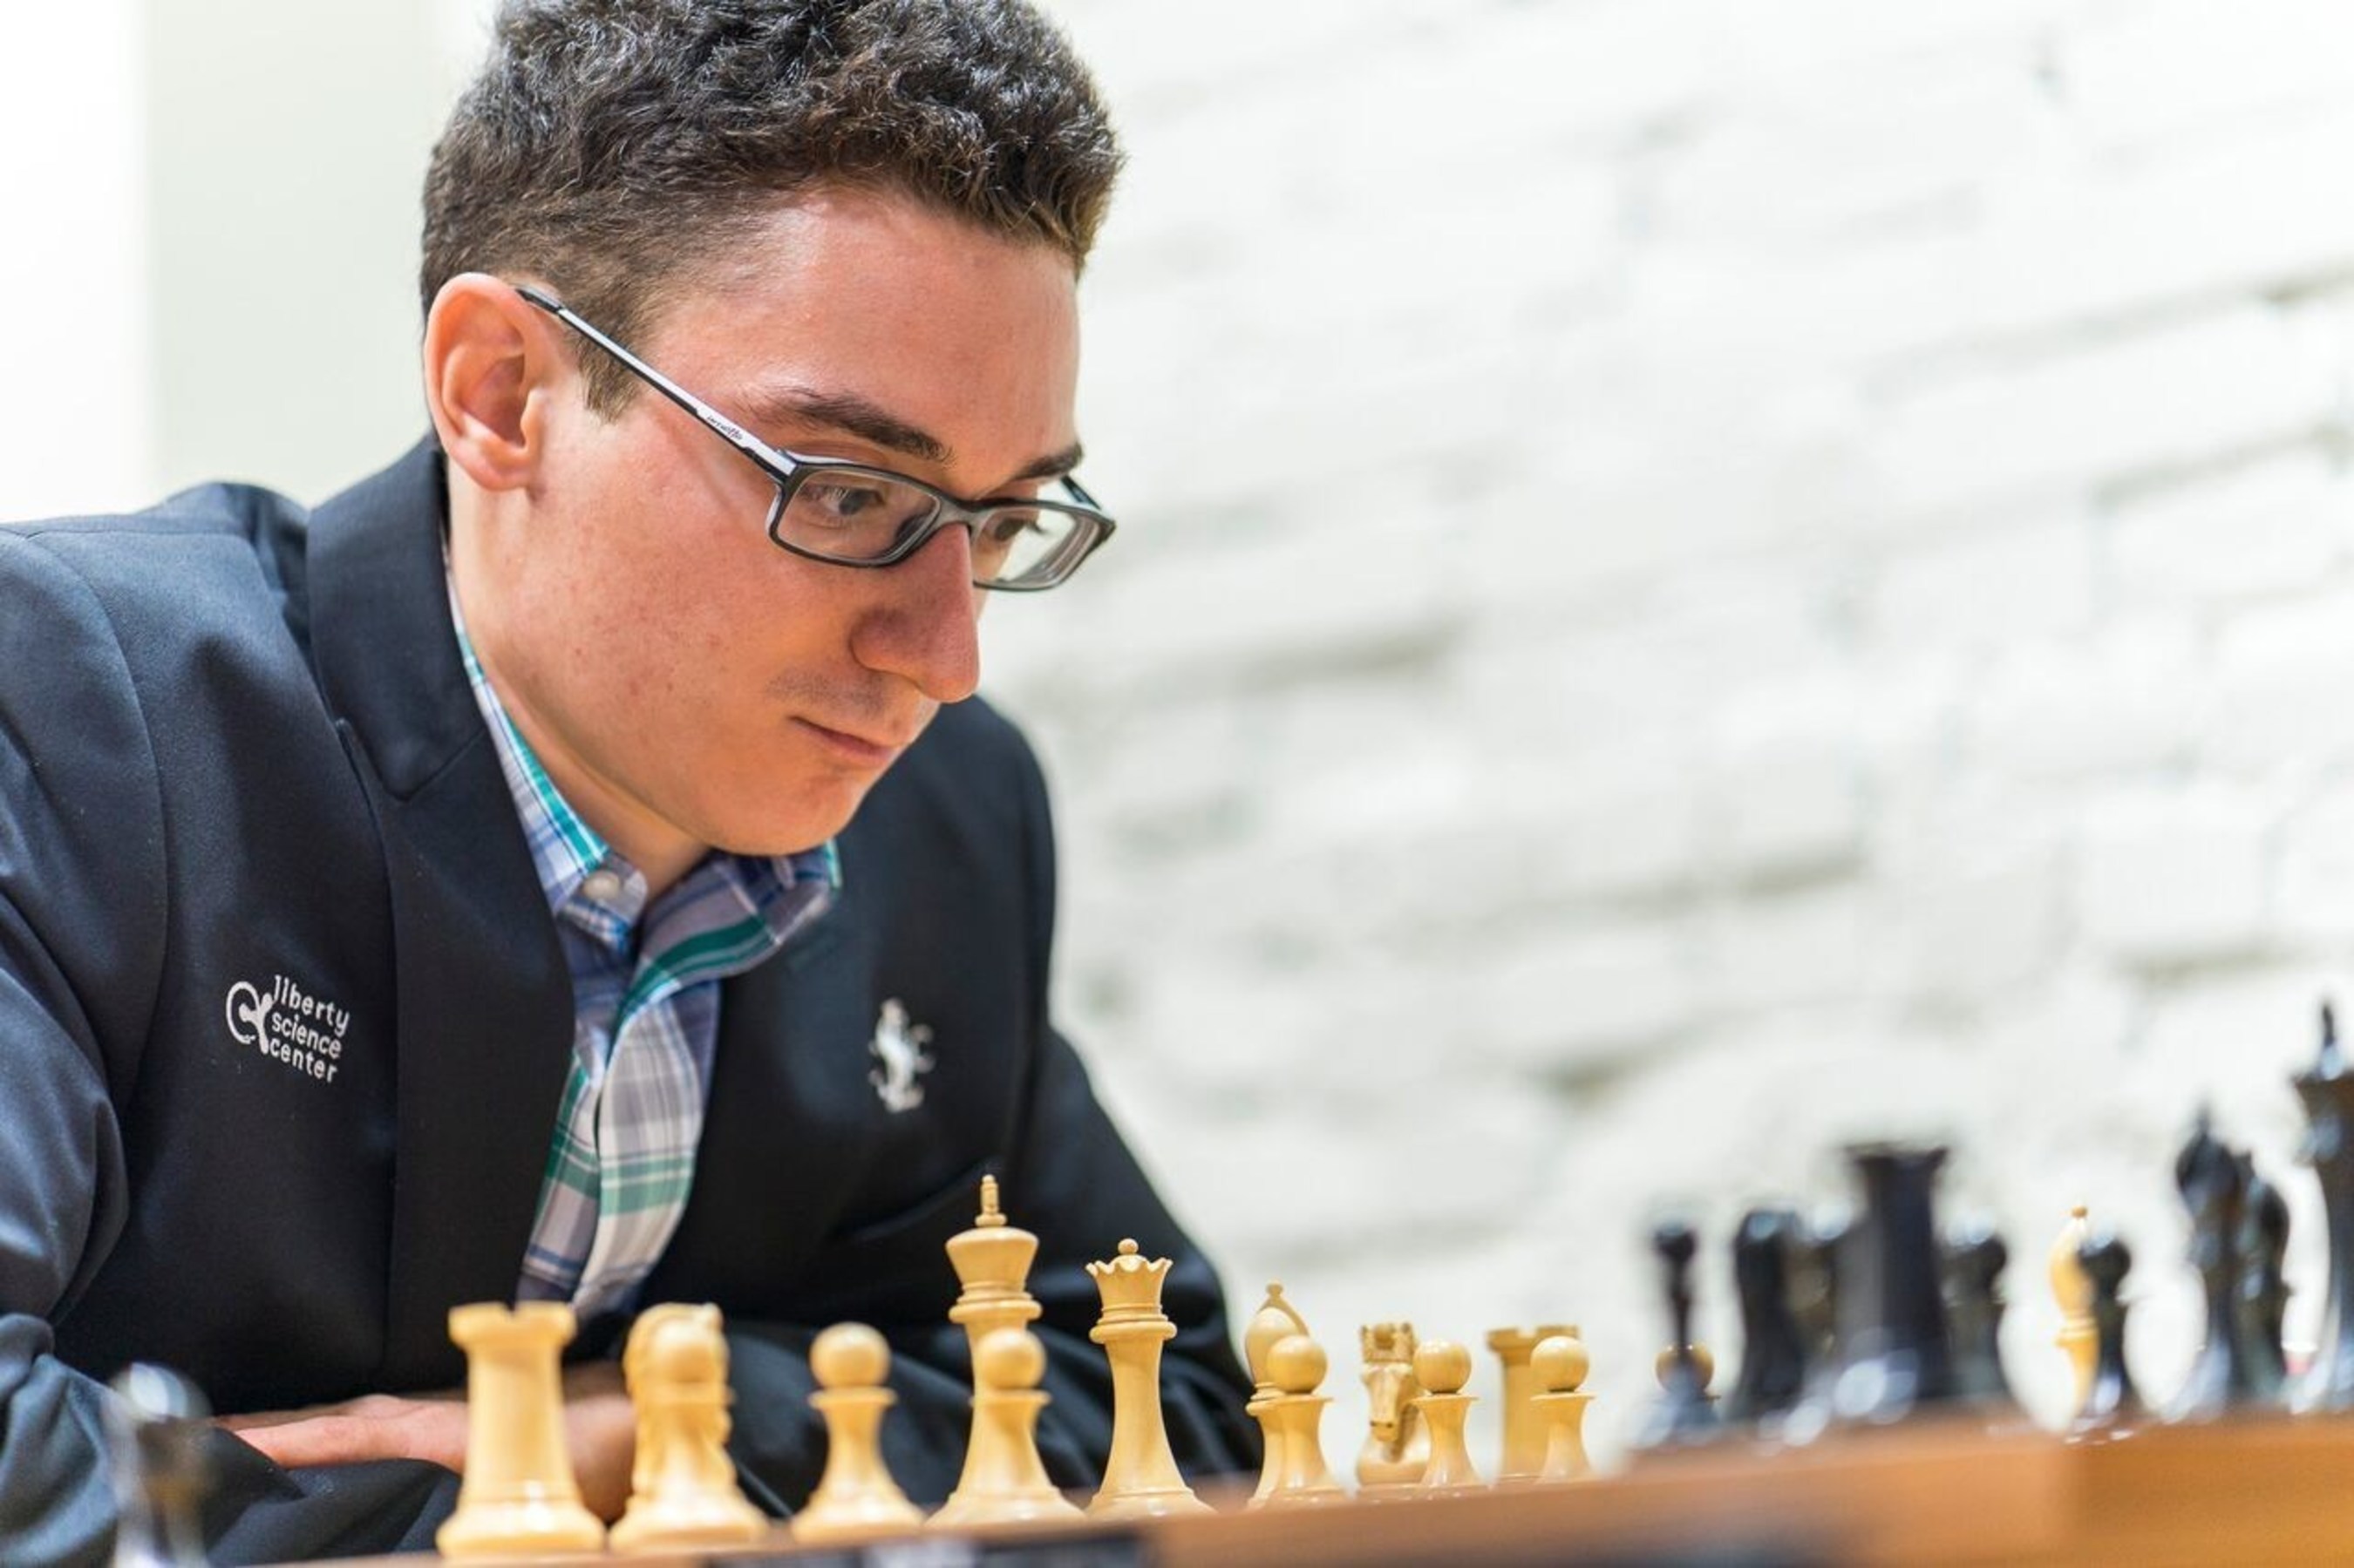 Grandmaster Fabiano Caruana was named the 2016 U.S. Chess Champion upon the concluding round of the U.S. Chess Championships at the Chess Club and Scholastic Center of Saint Louis (CCSCSL) April 25. Caruana faced 11 opponents in nearly two weeks of tournament play to win the title and $50,000 prize. Caruana, 23, and 2016 U.S. Women's Champion, International Master Paikidze, 22, are among the youngest combined pair of U.S. Champions in the tournament's history.